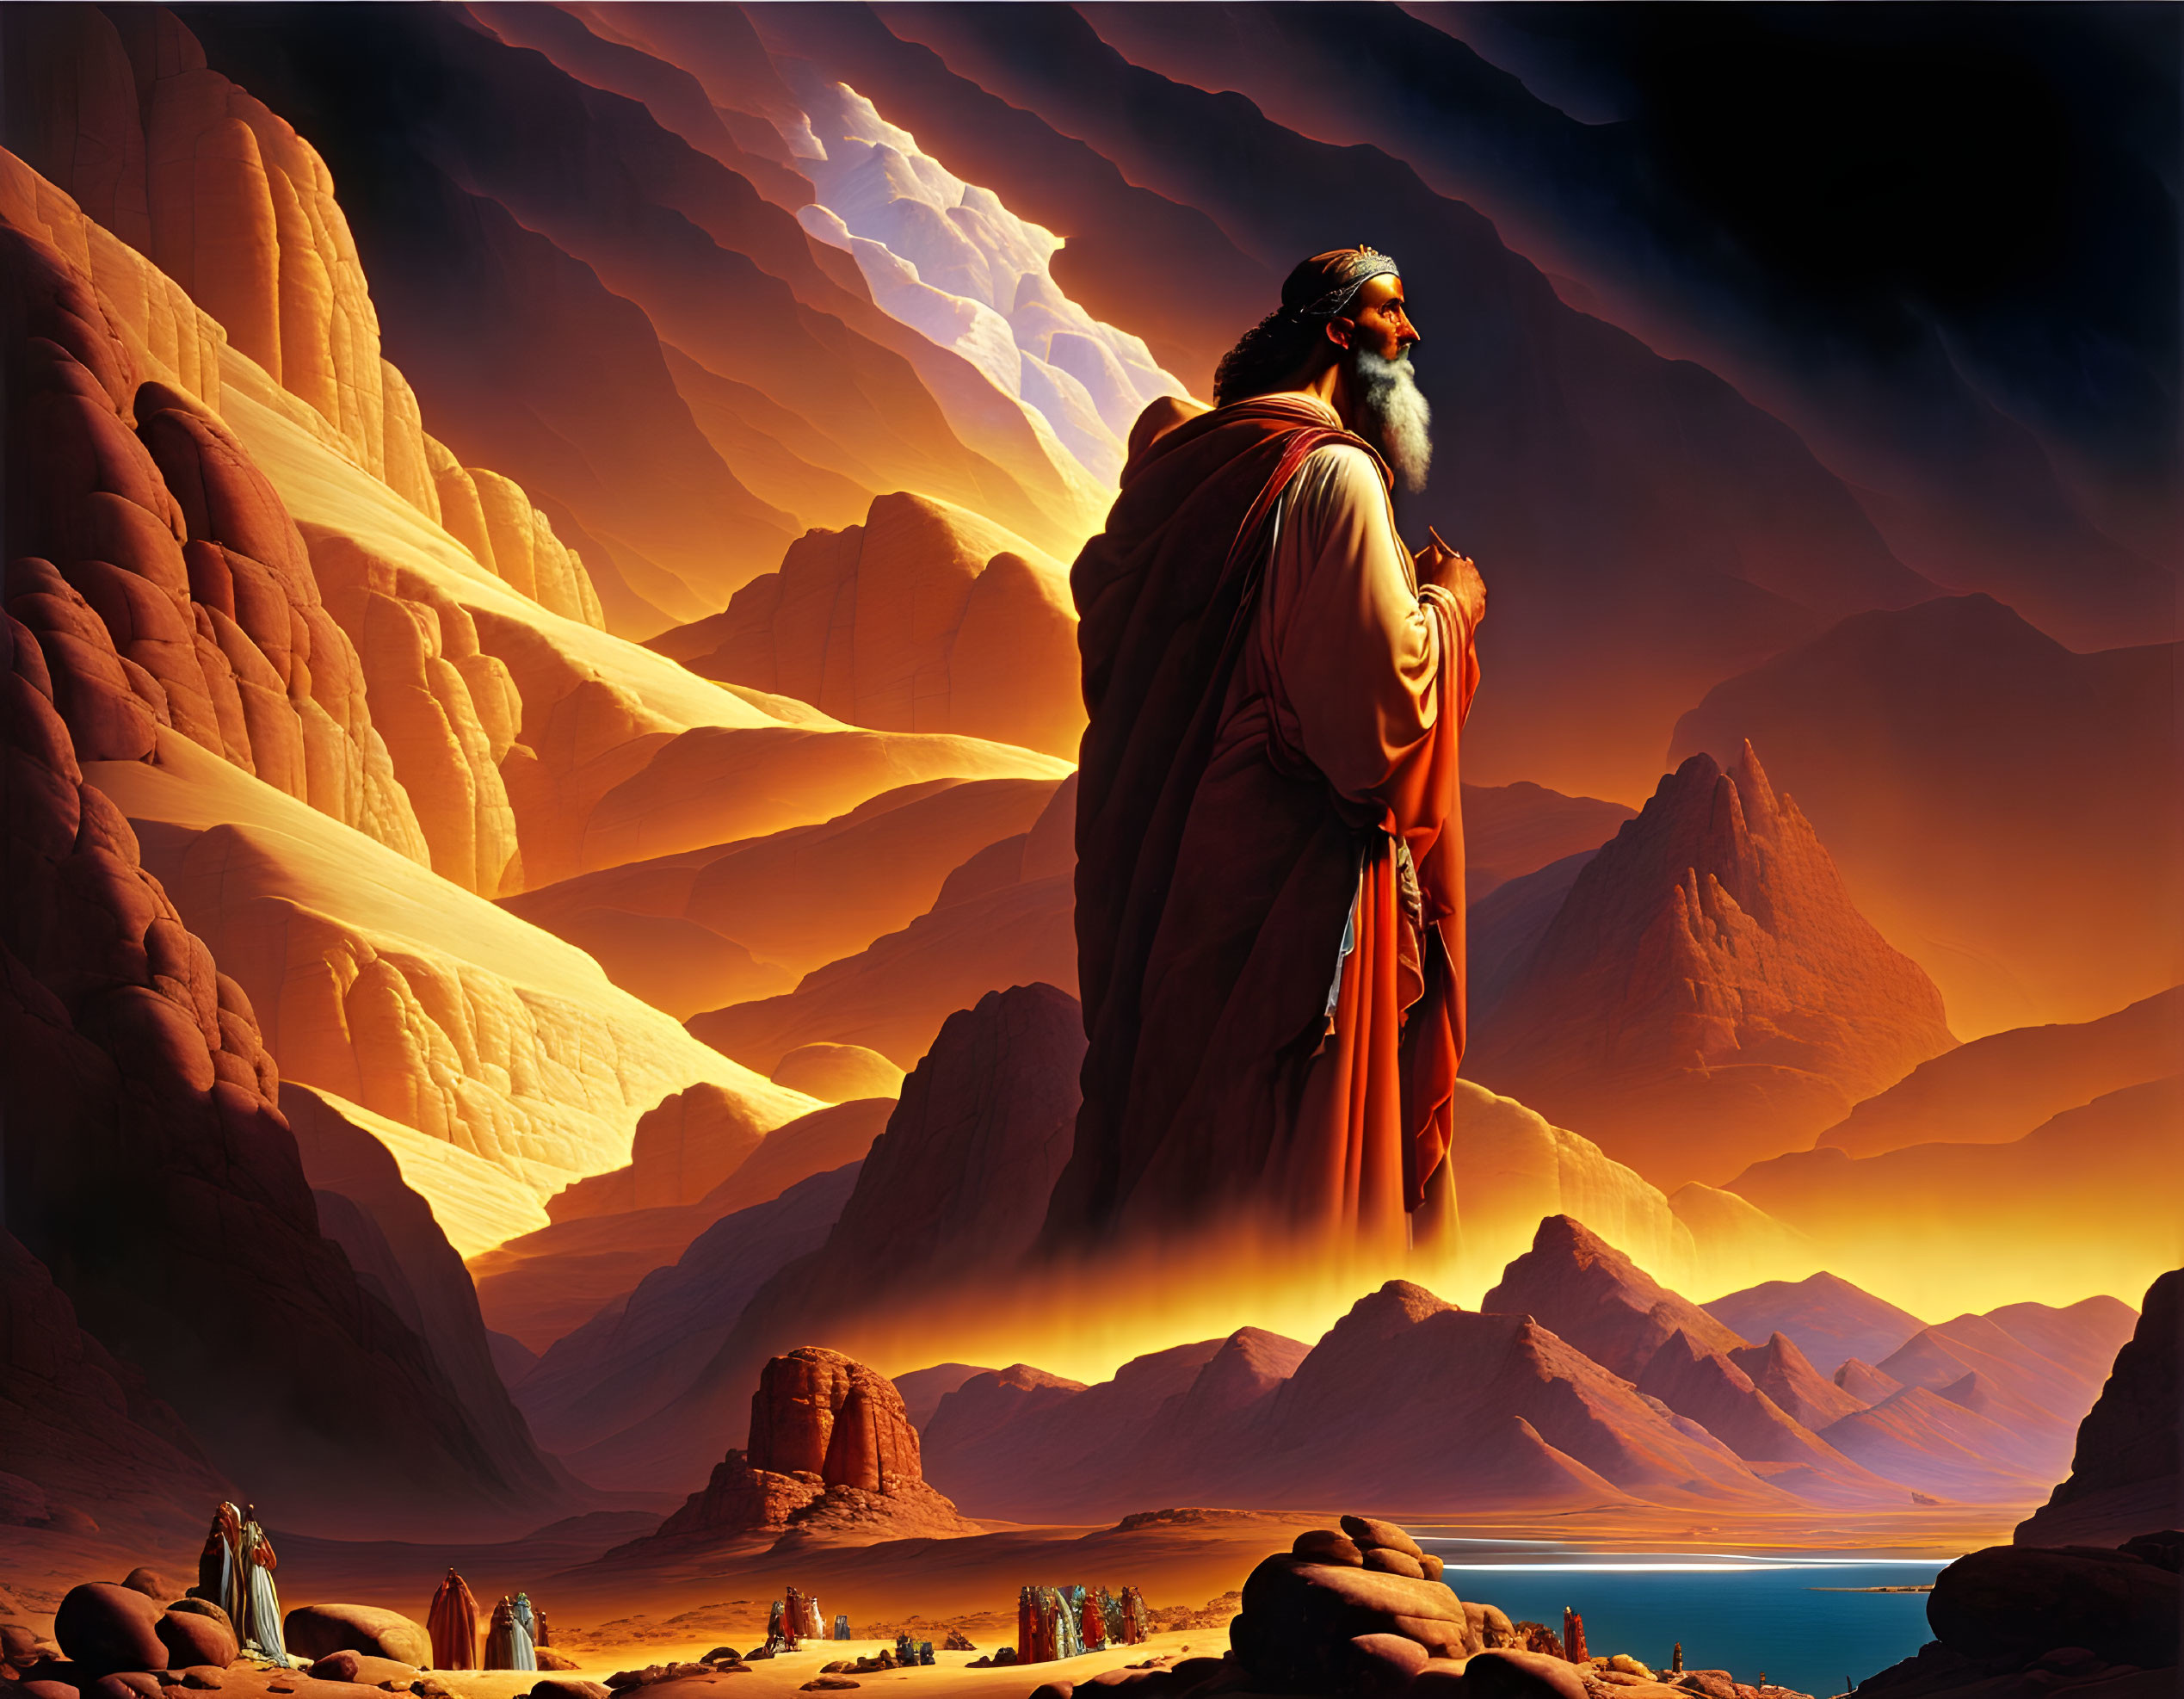 Moses speaks with the Lord.